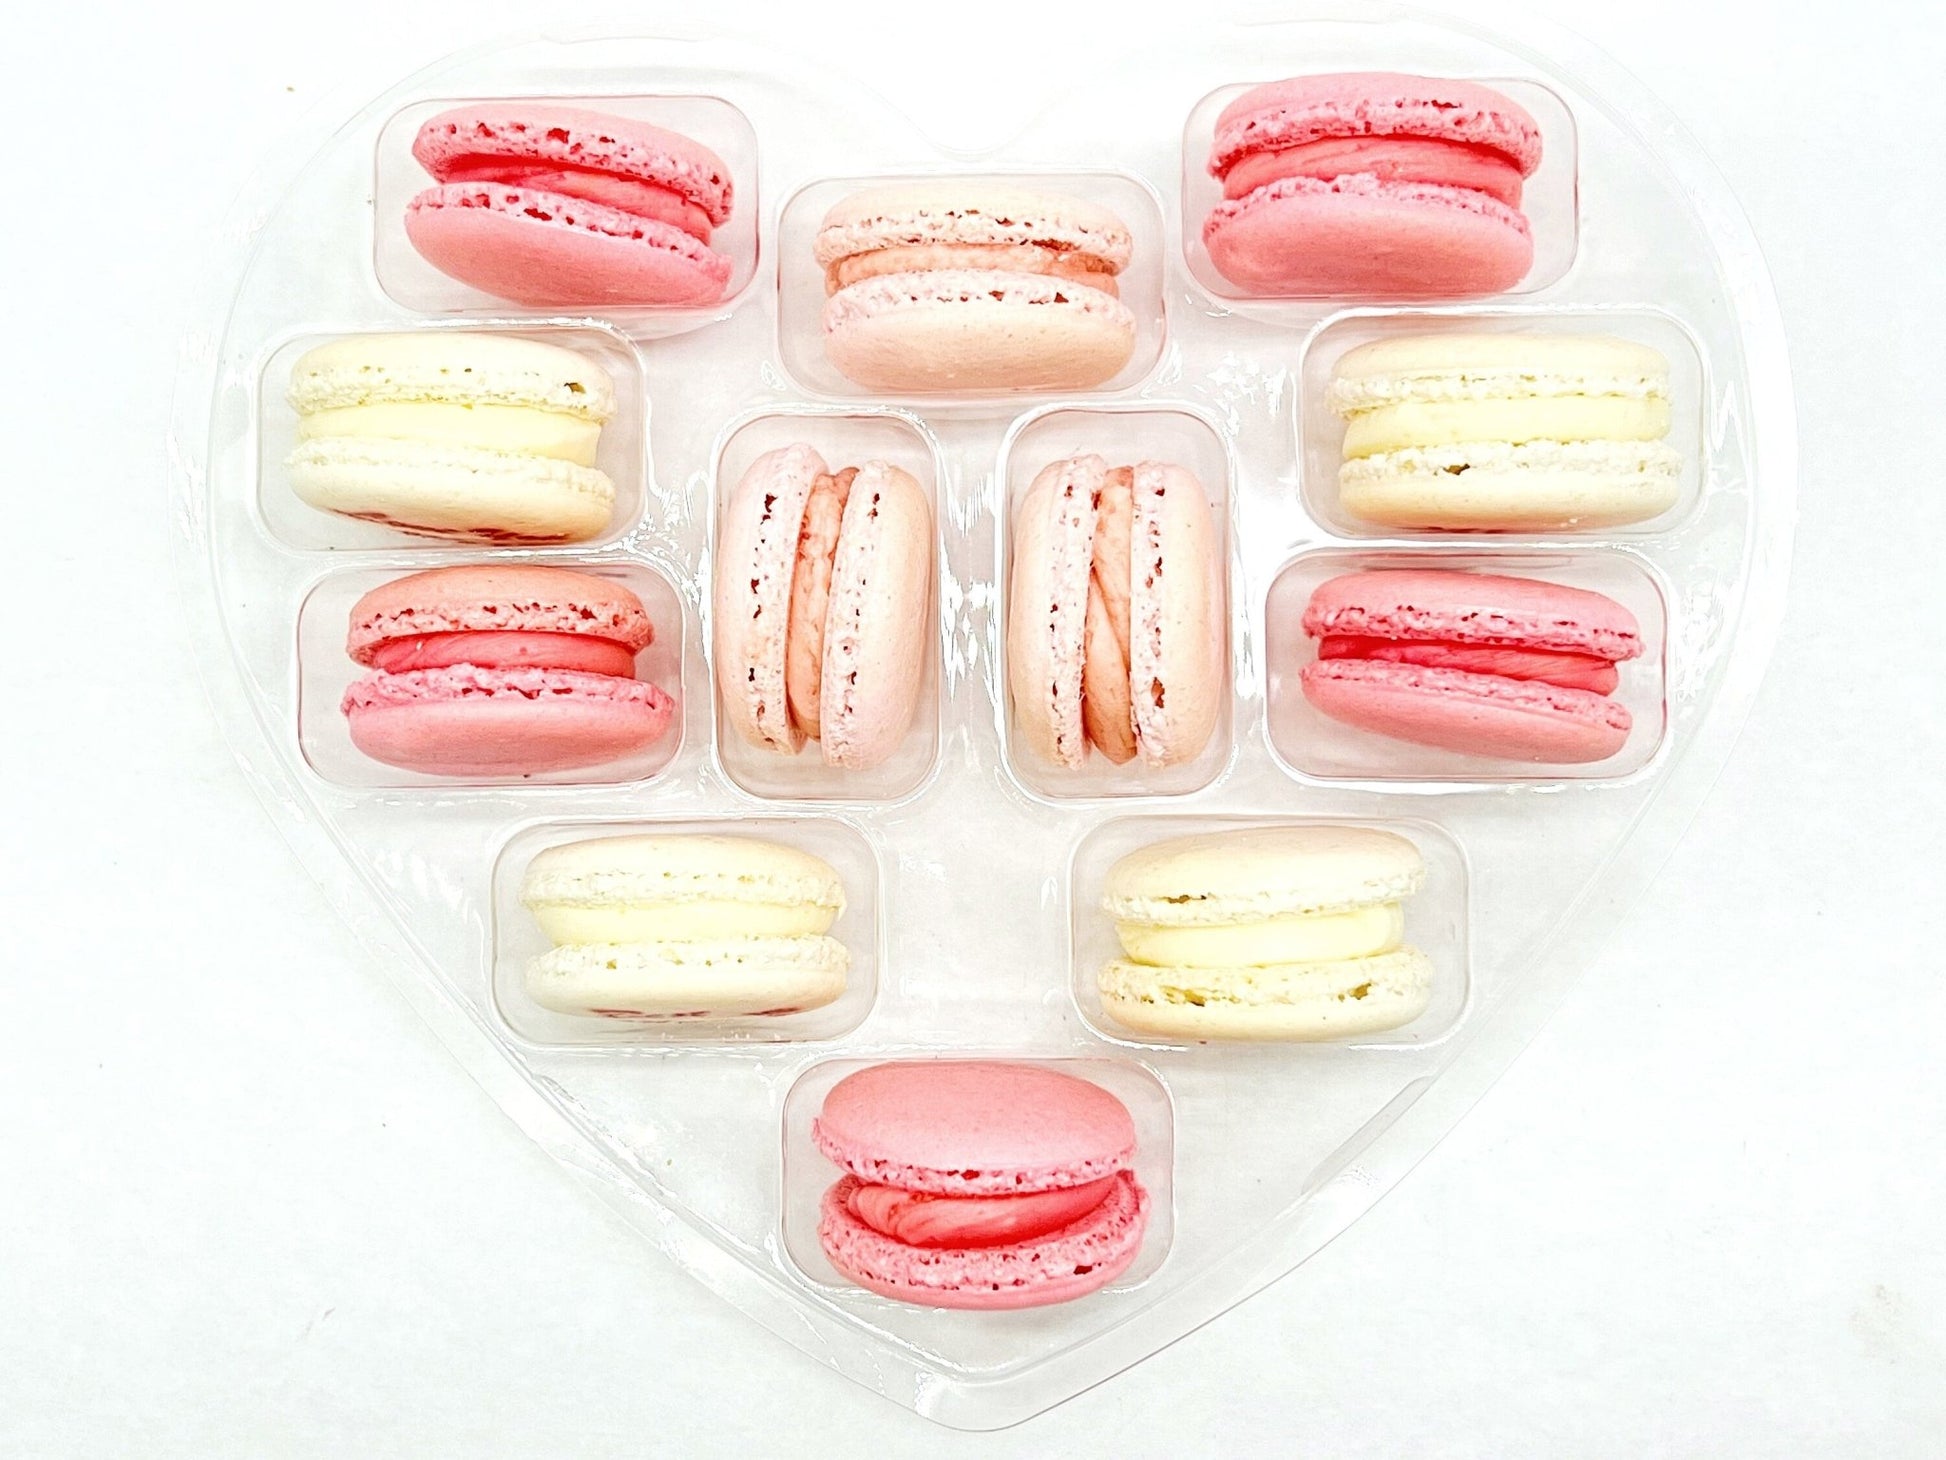 French Macaron Gift Set for Mom | 12 Pack Assortment - Macaron Centrale